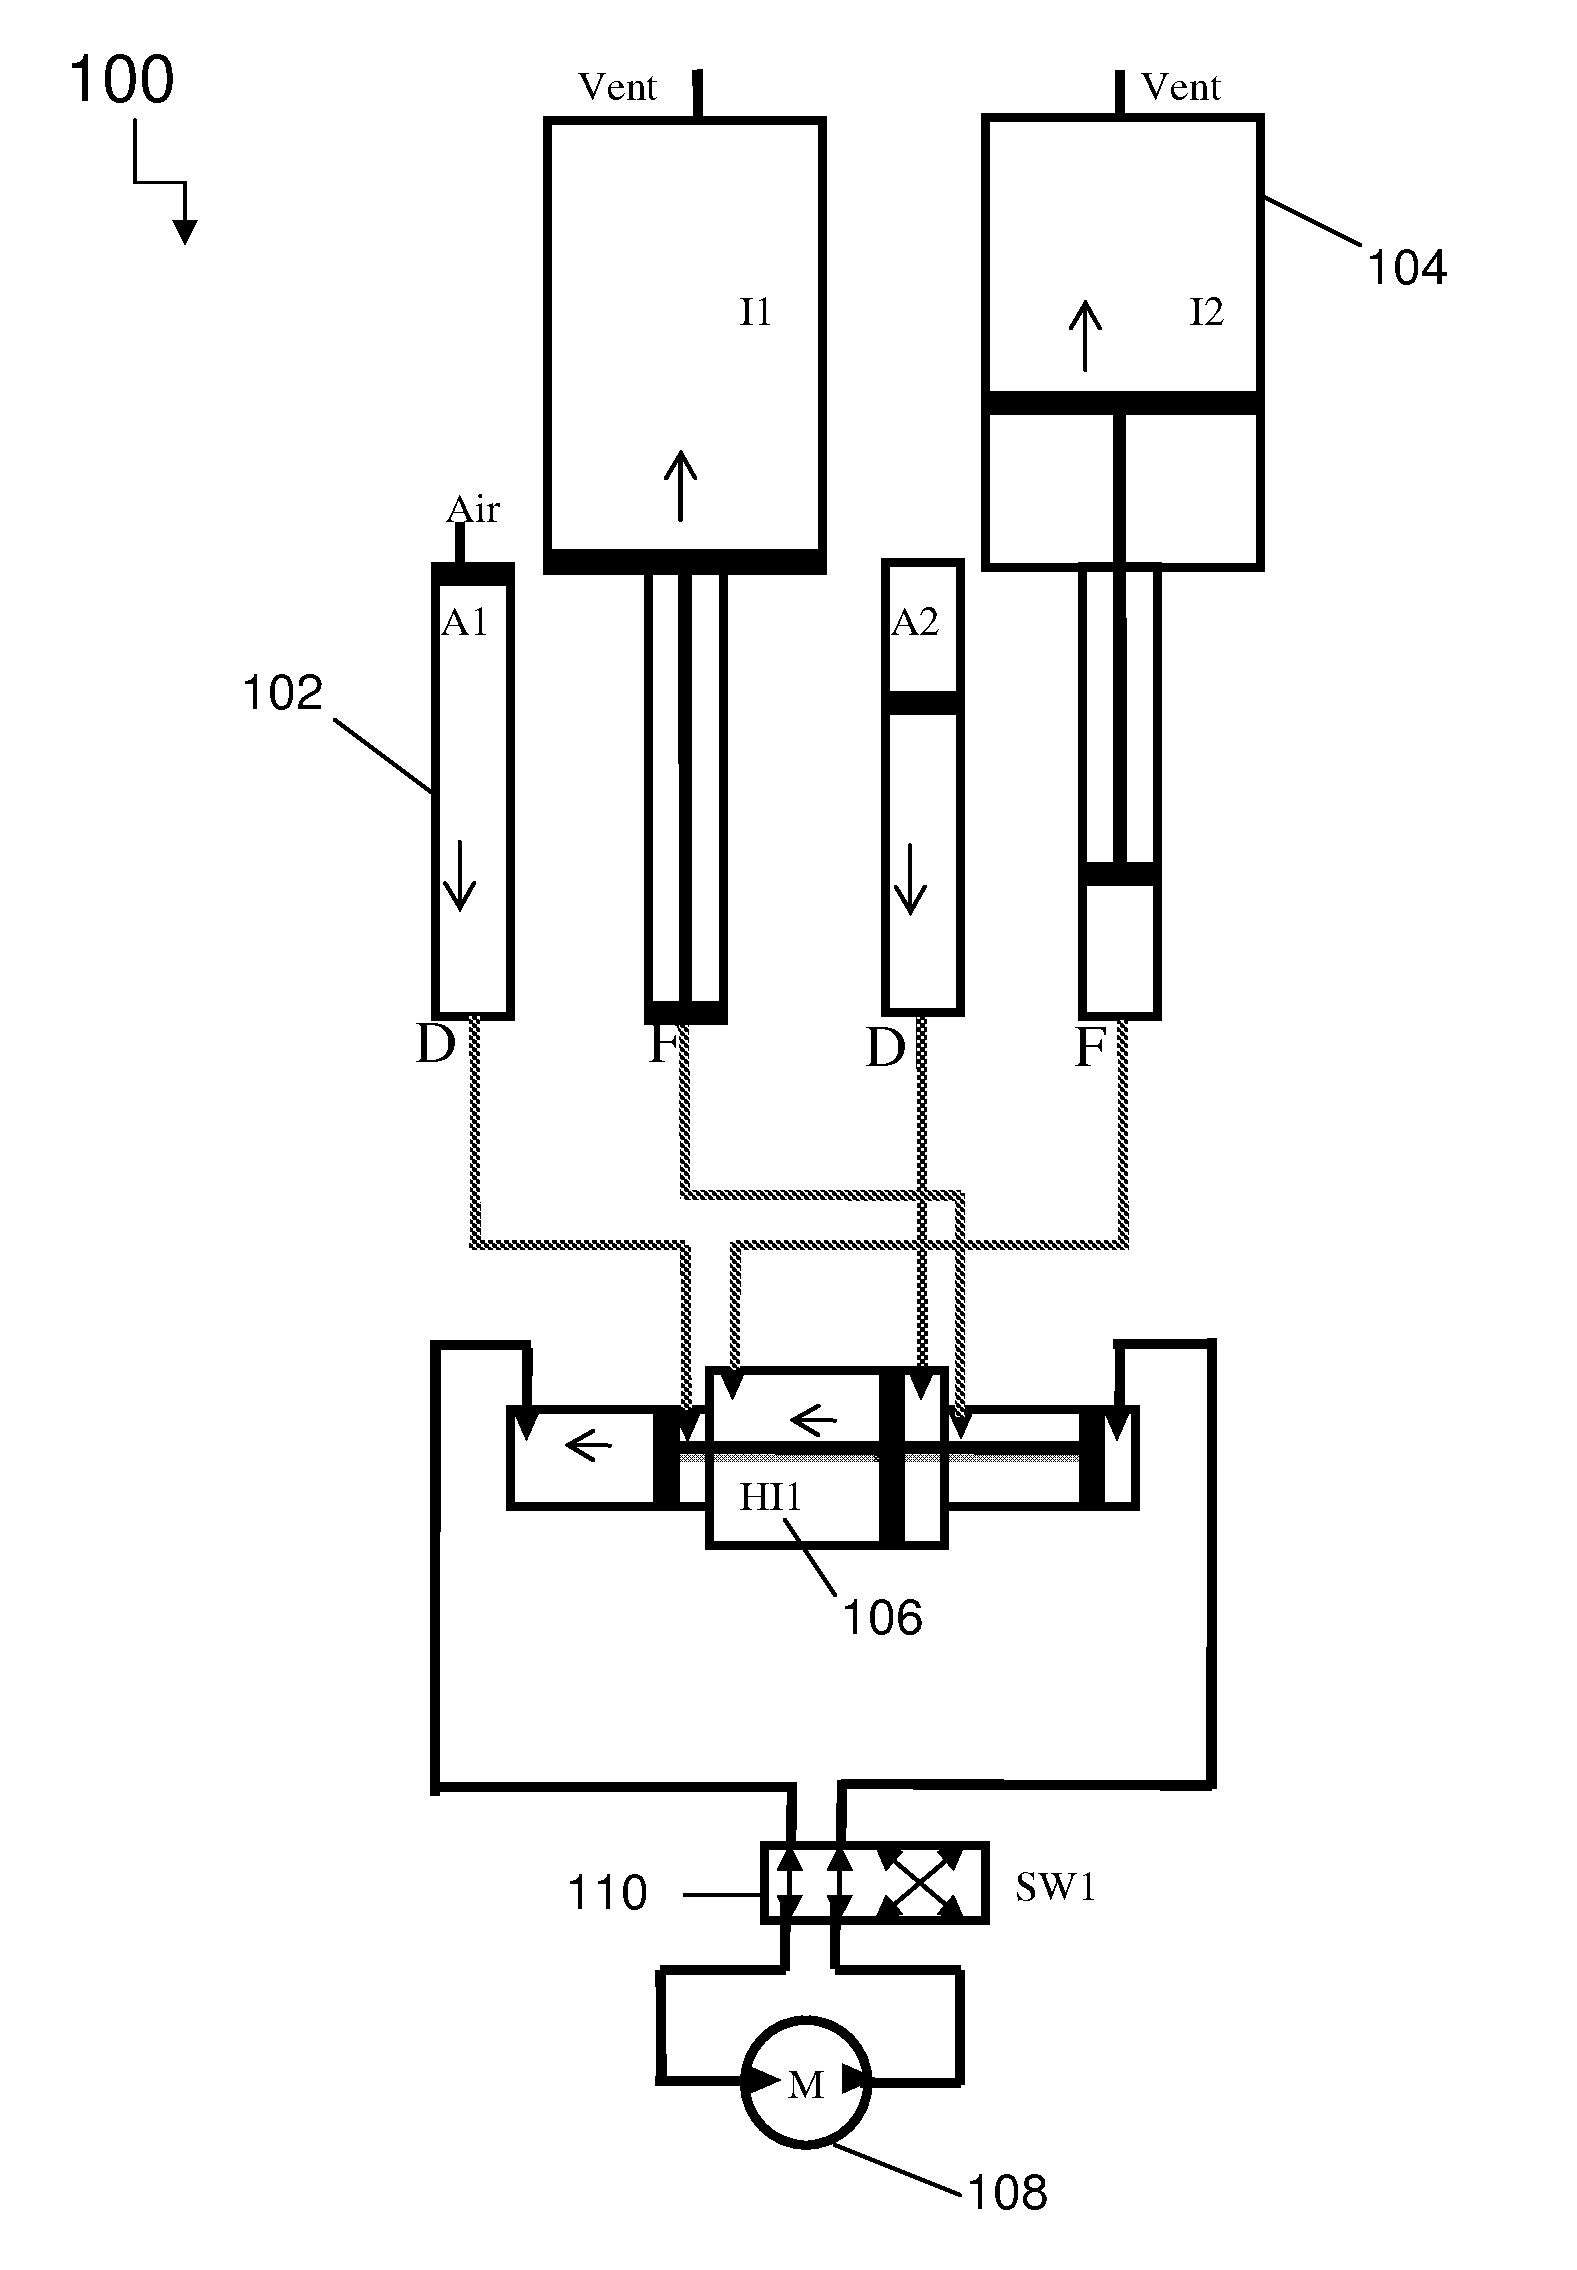 Systems and methods for improving drivetrain efficiency for compressed gas energy storage and recovery systems